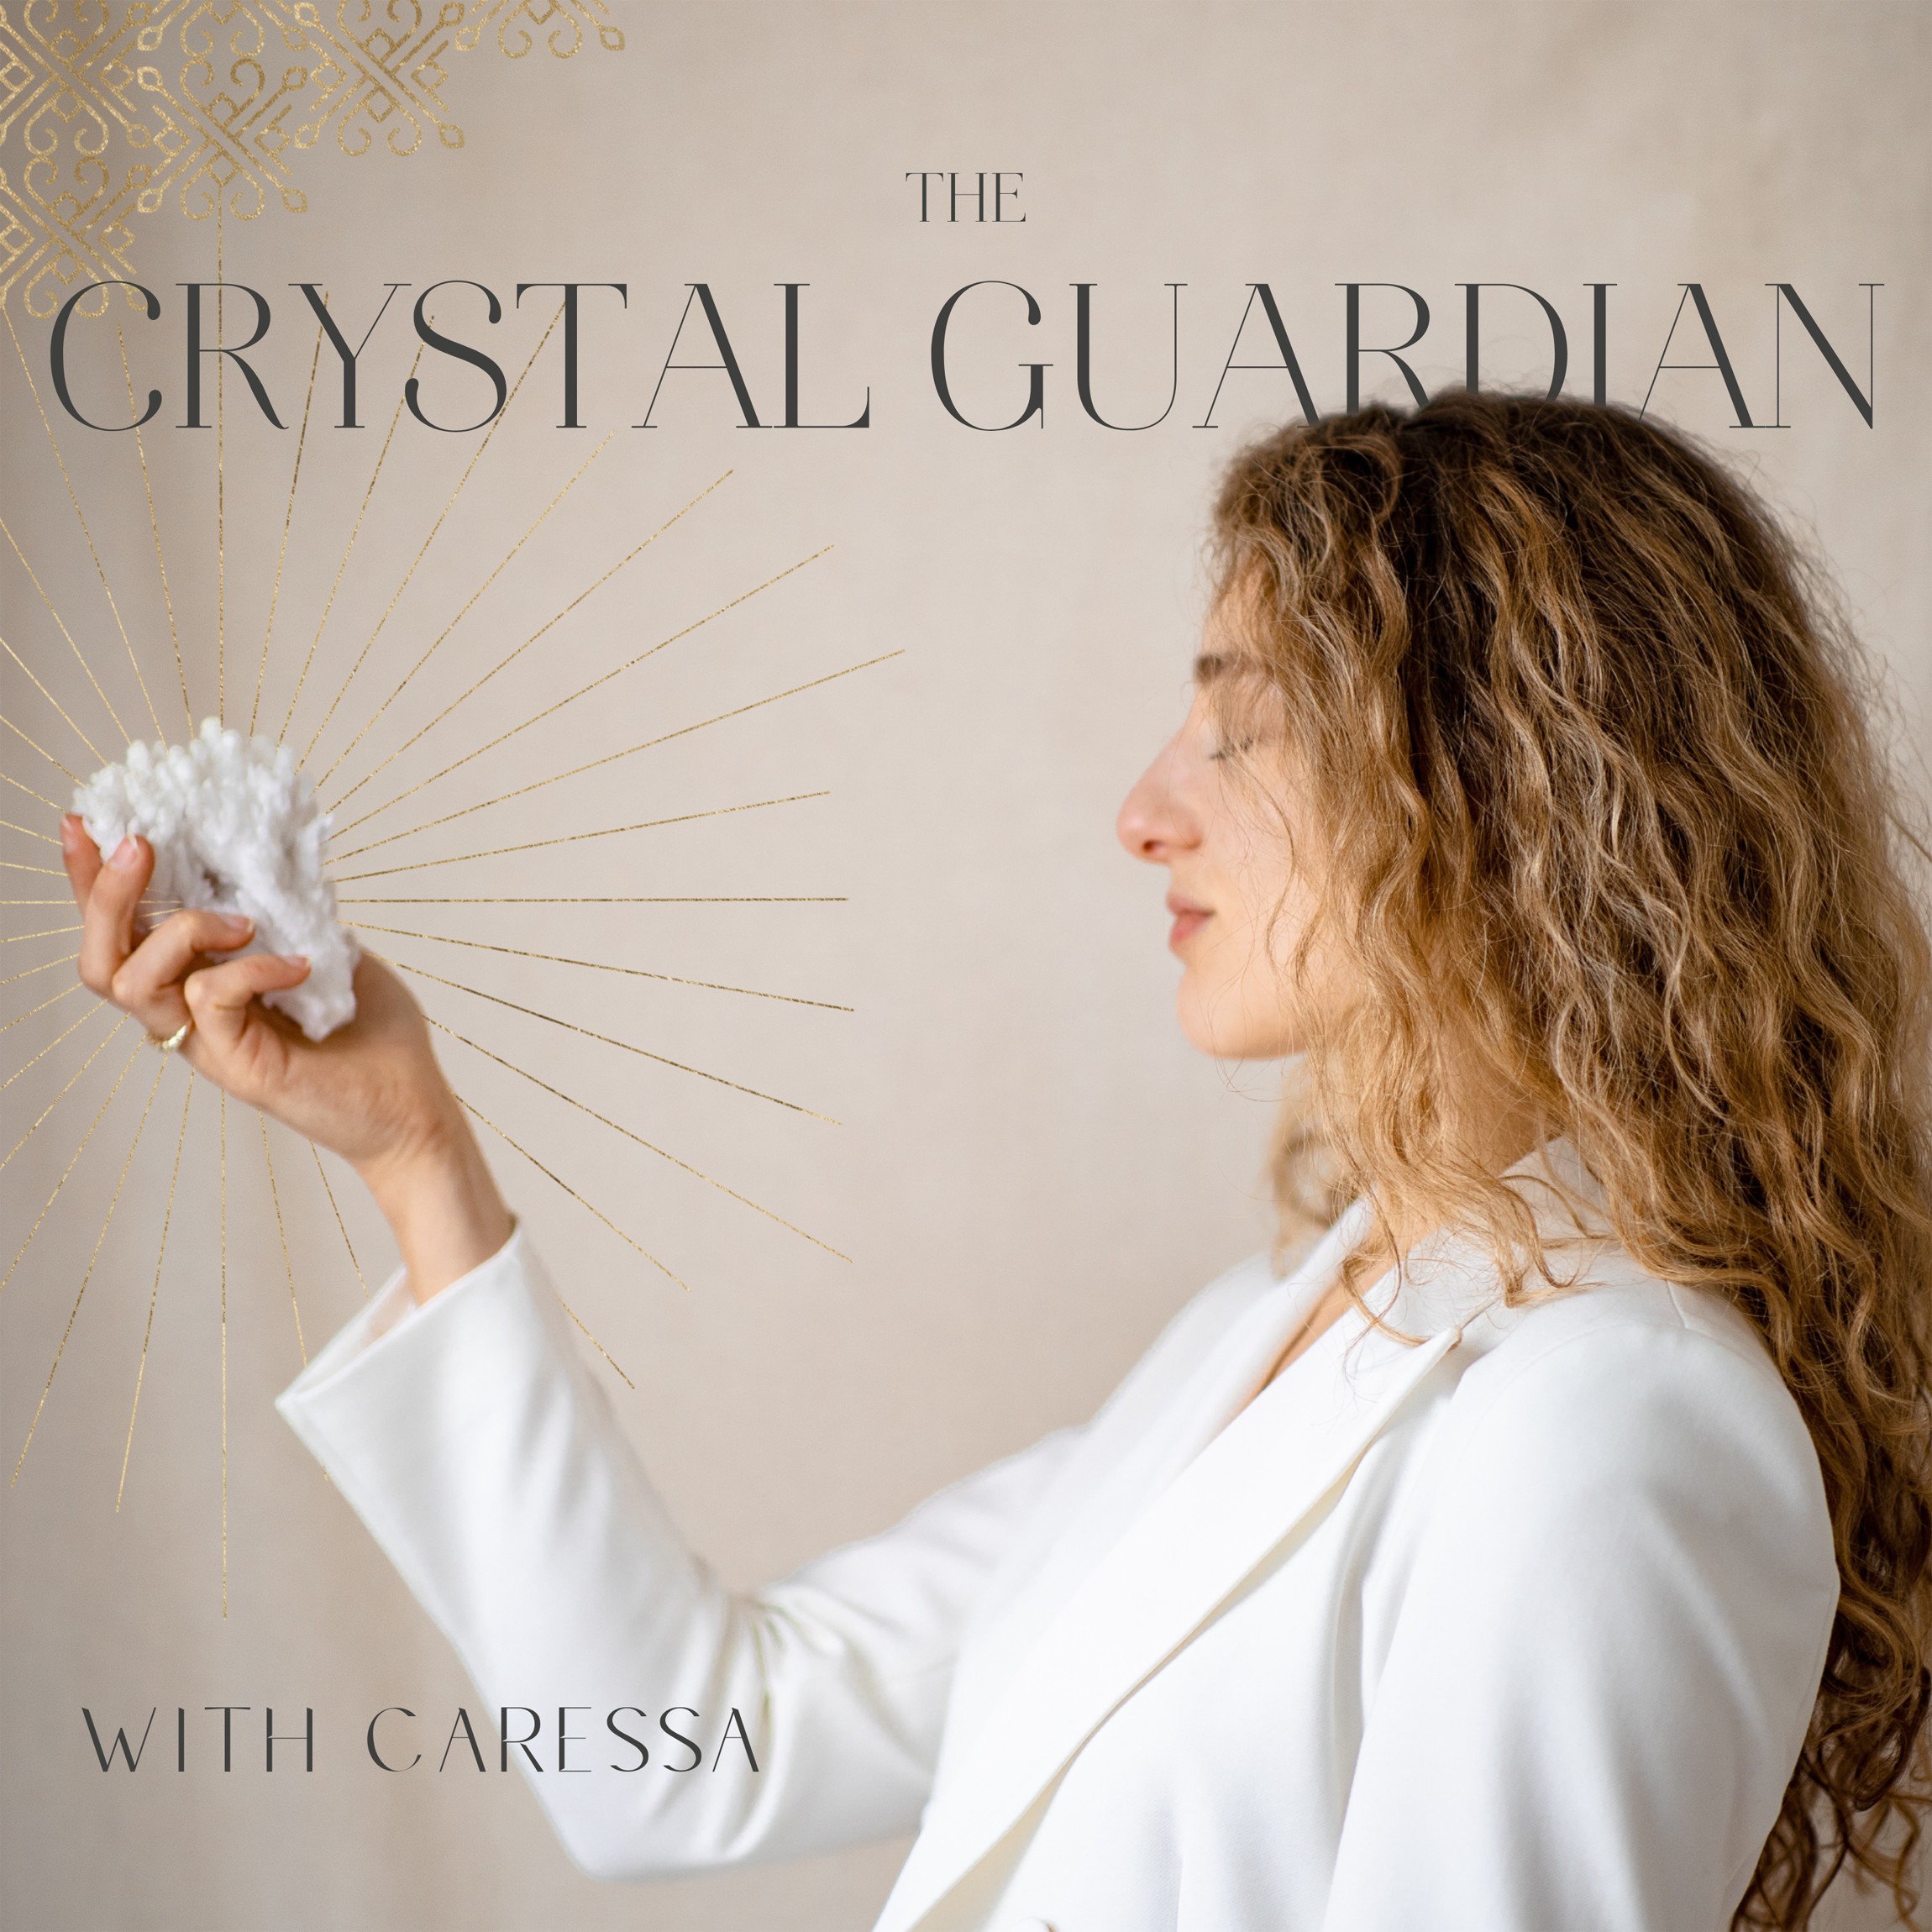 The Crystal Guardian